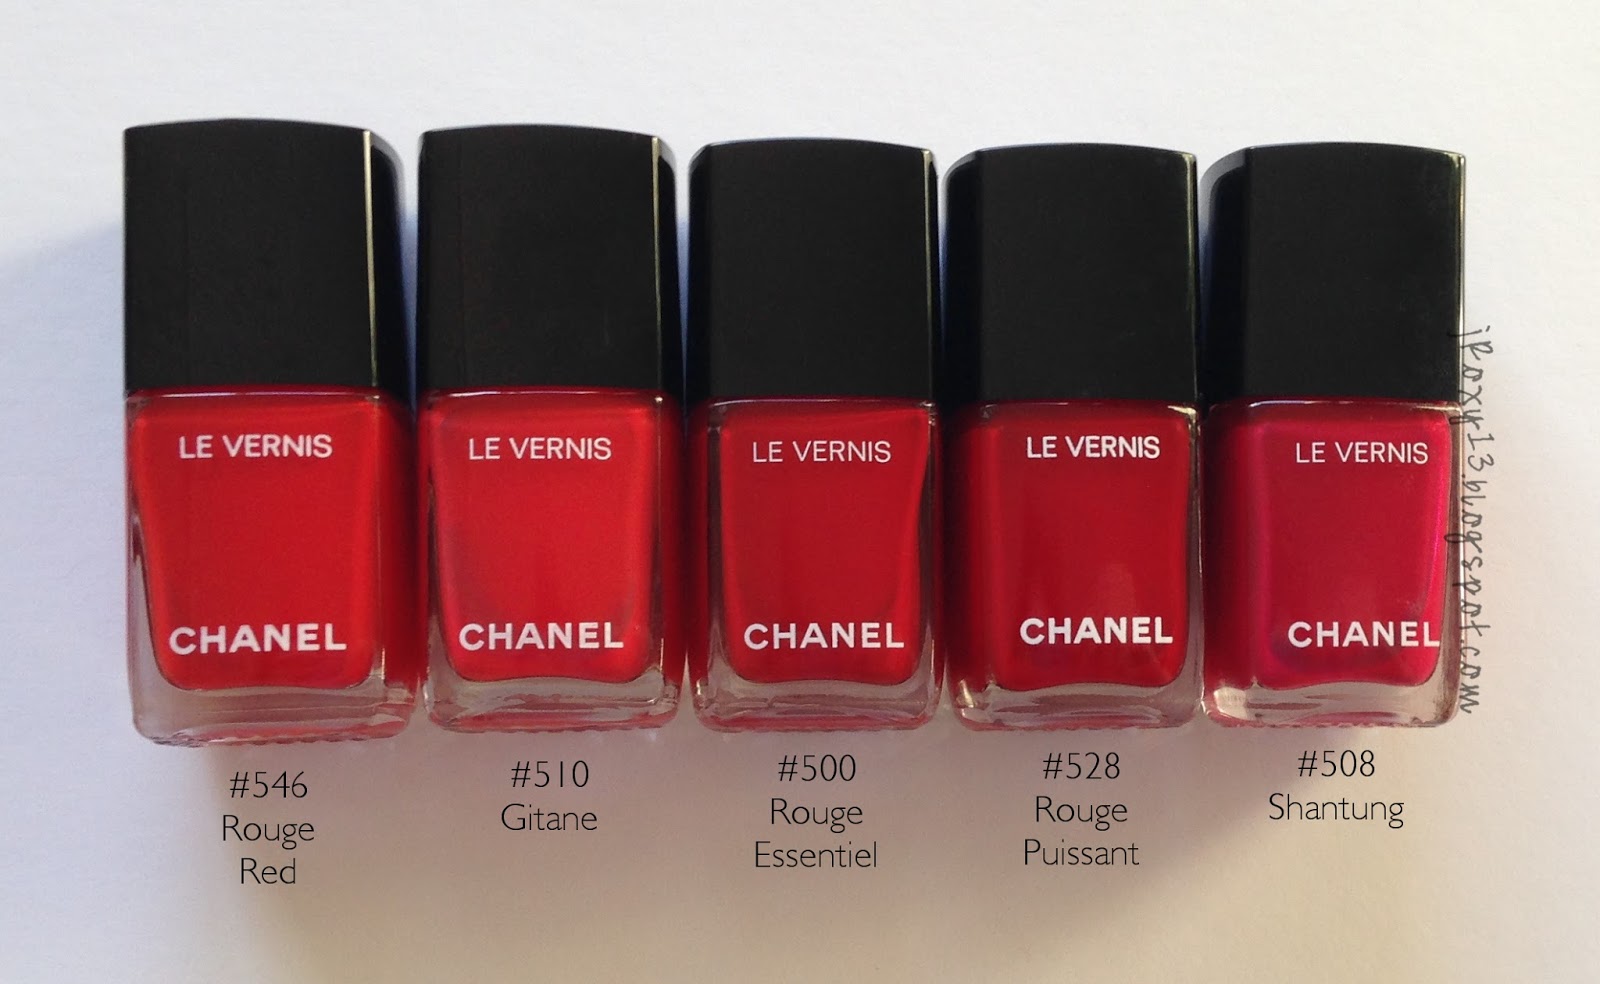 Chanel in #546 Rouge Red, #548 Blanc White, #556 Beige Beige, and Le Top  Coat Top Coat Teinté in Black Métamorphosis Swatches + Comparisons